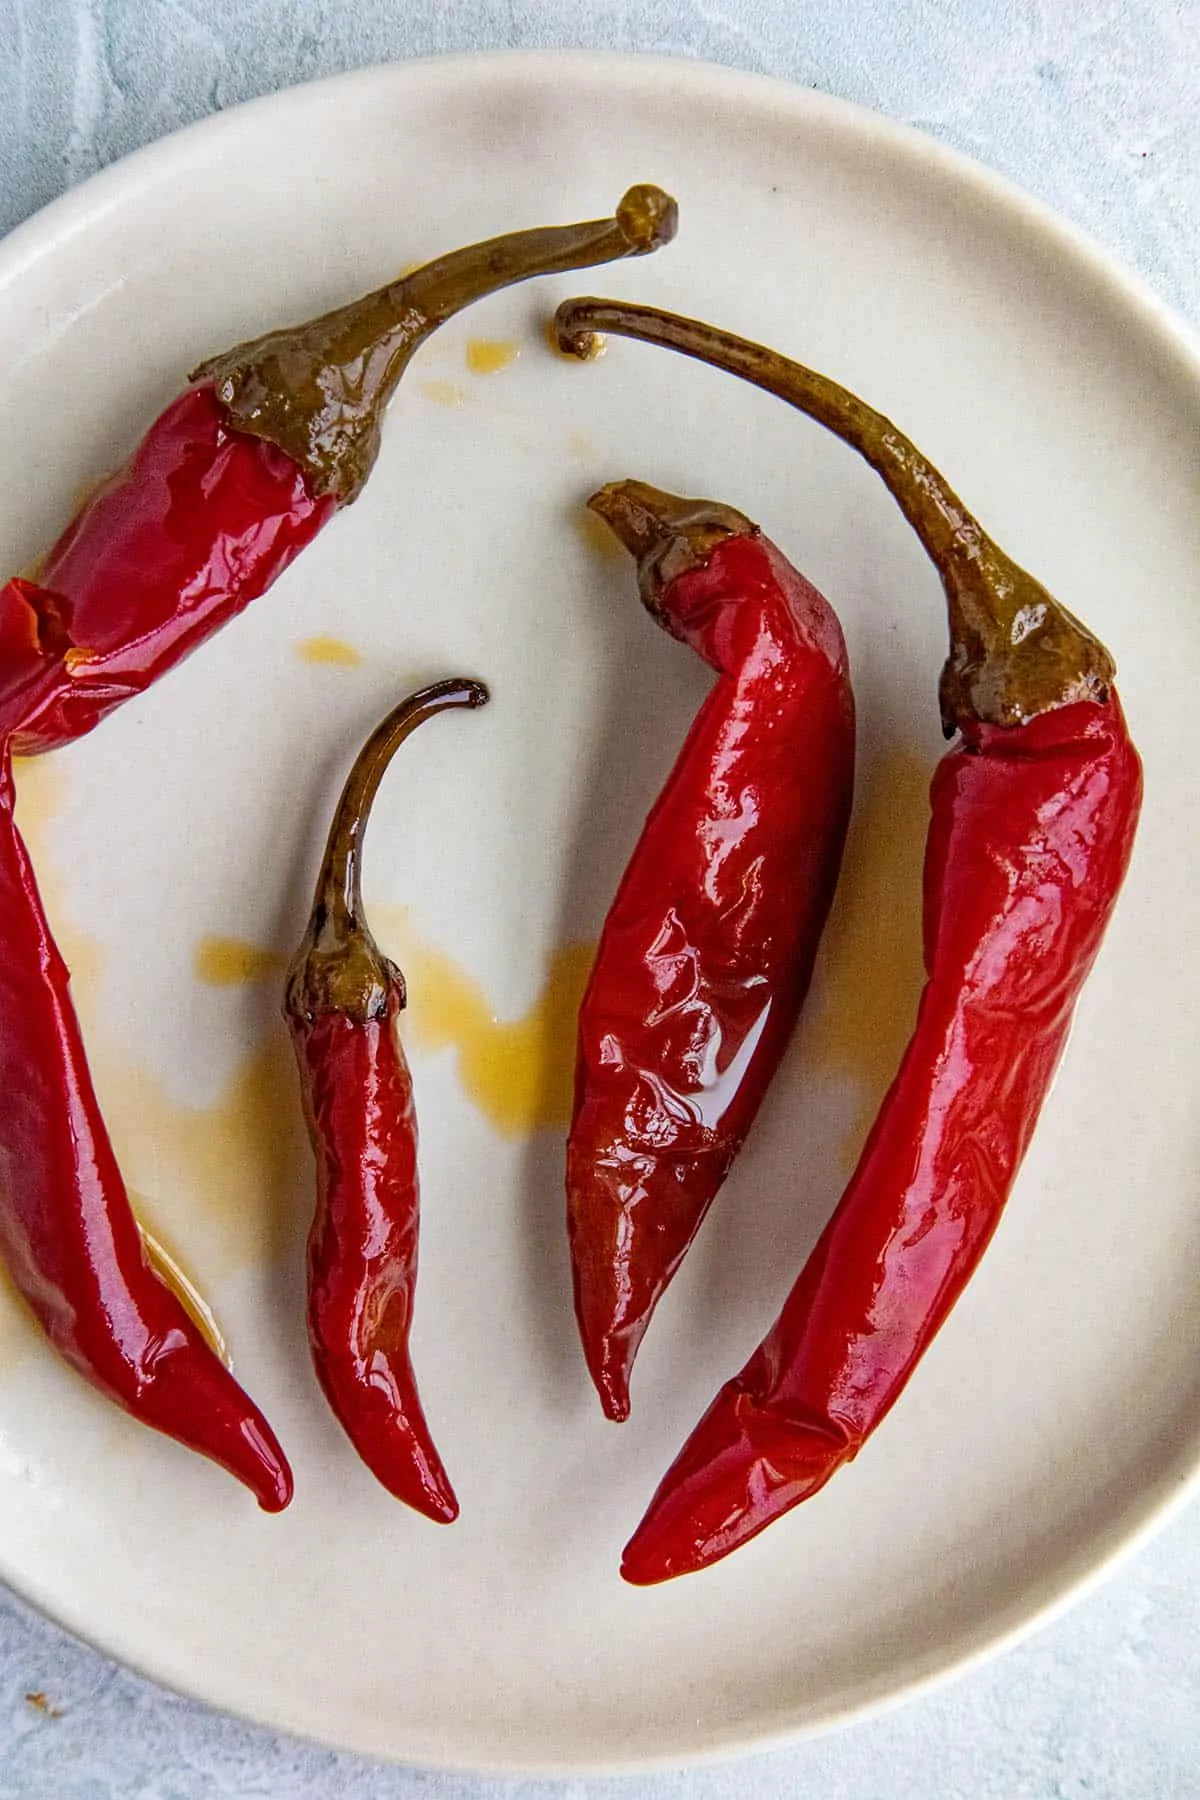 Calabrian Chili: Spicy Italian Peppers